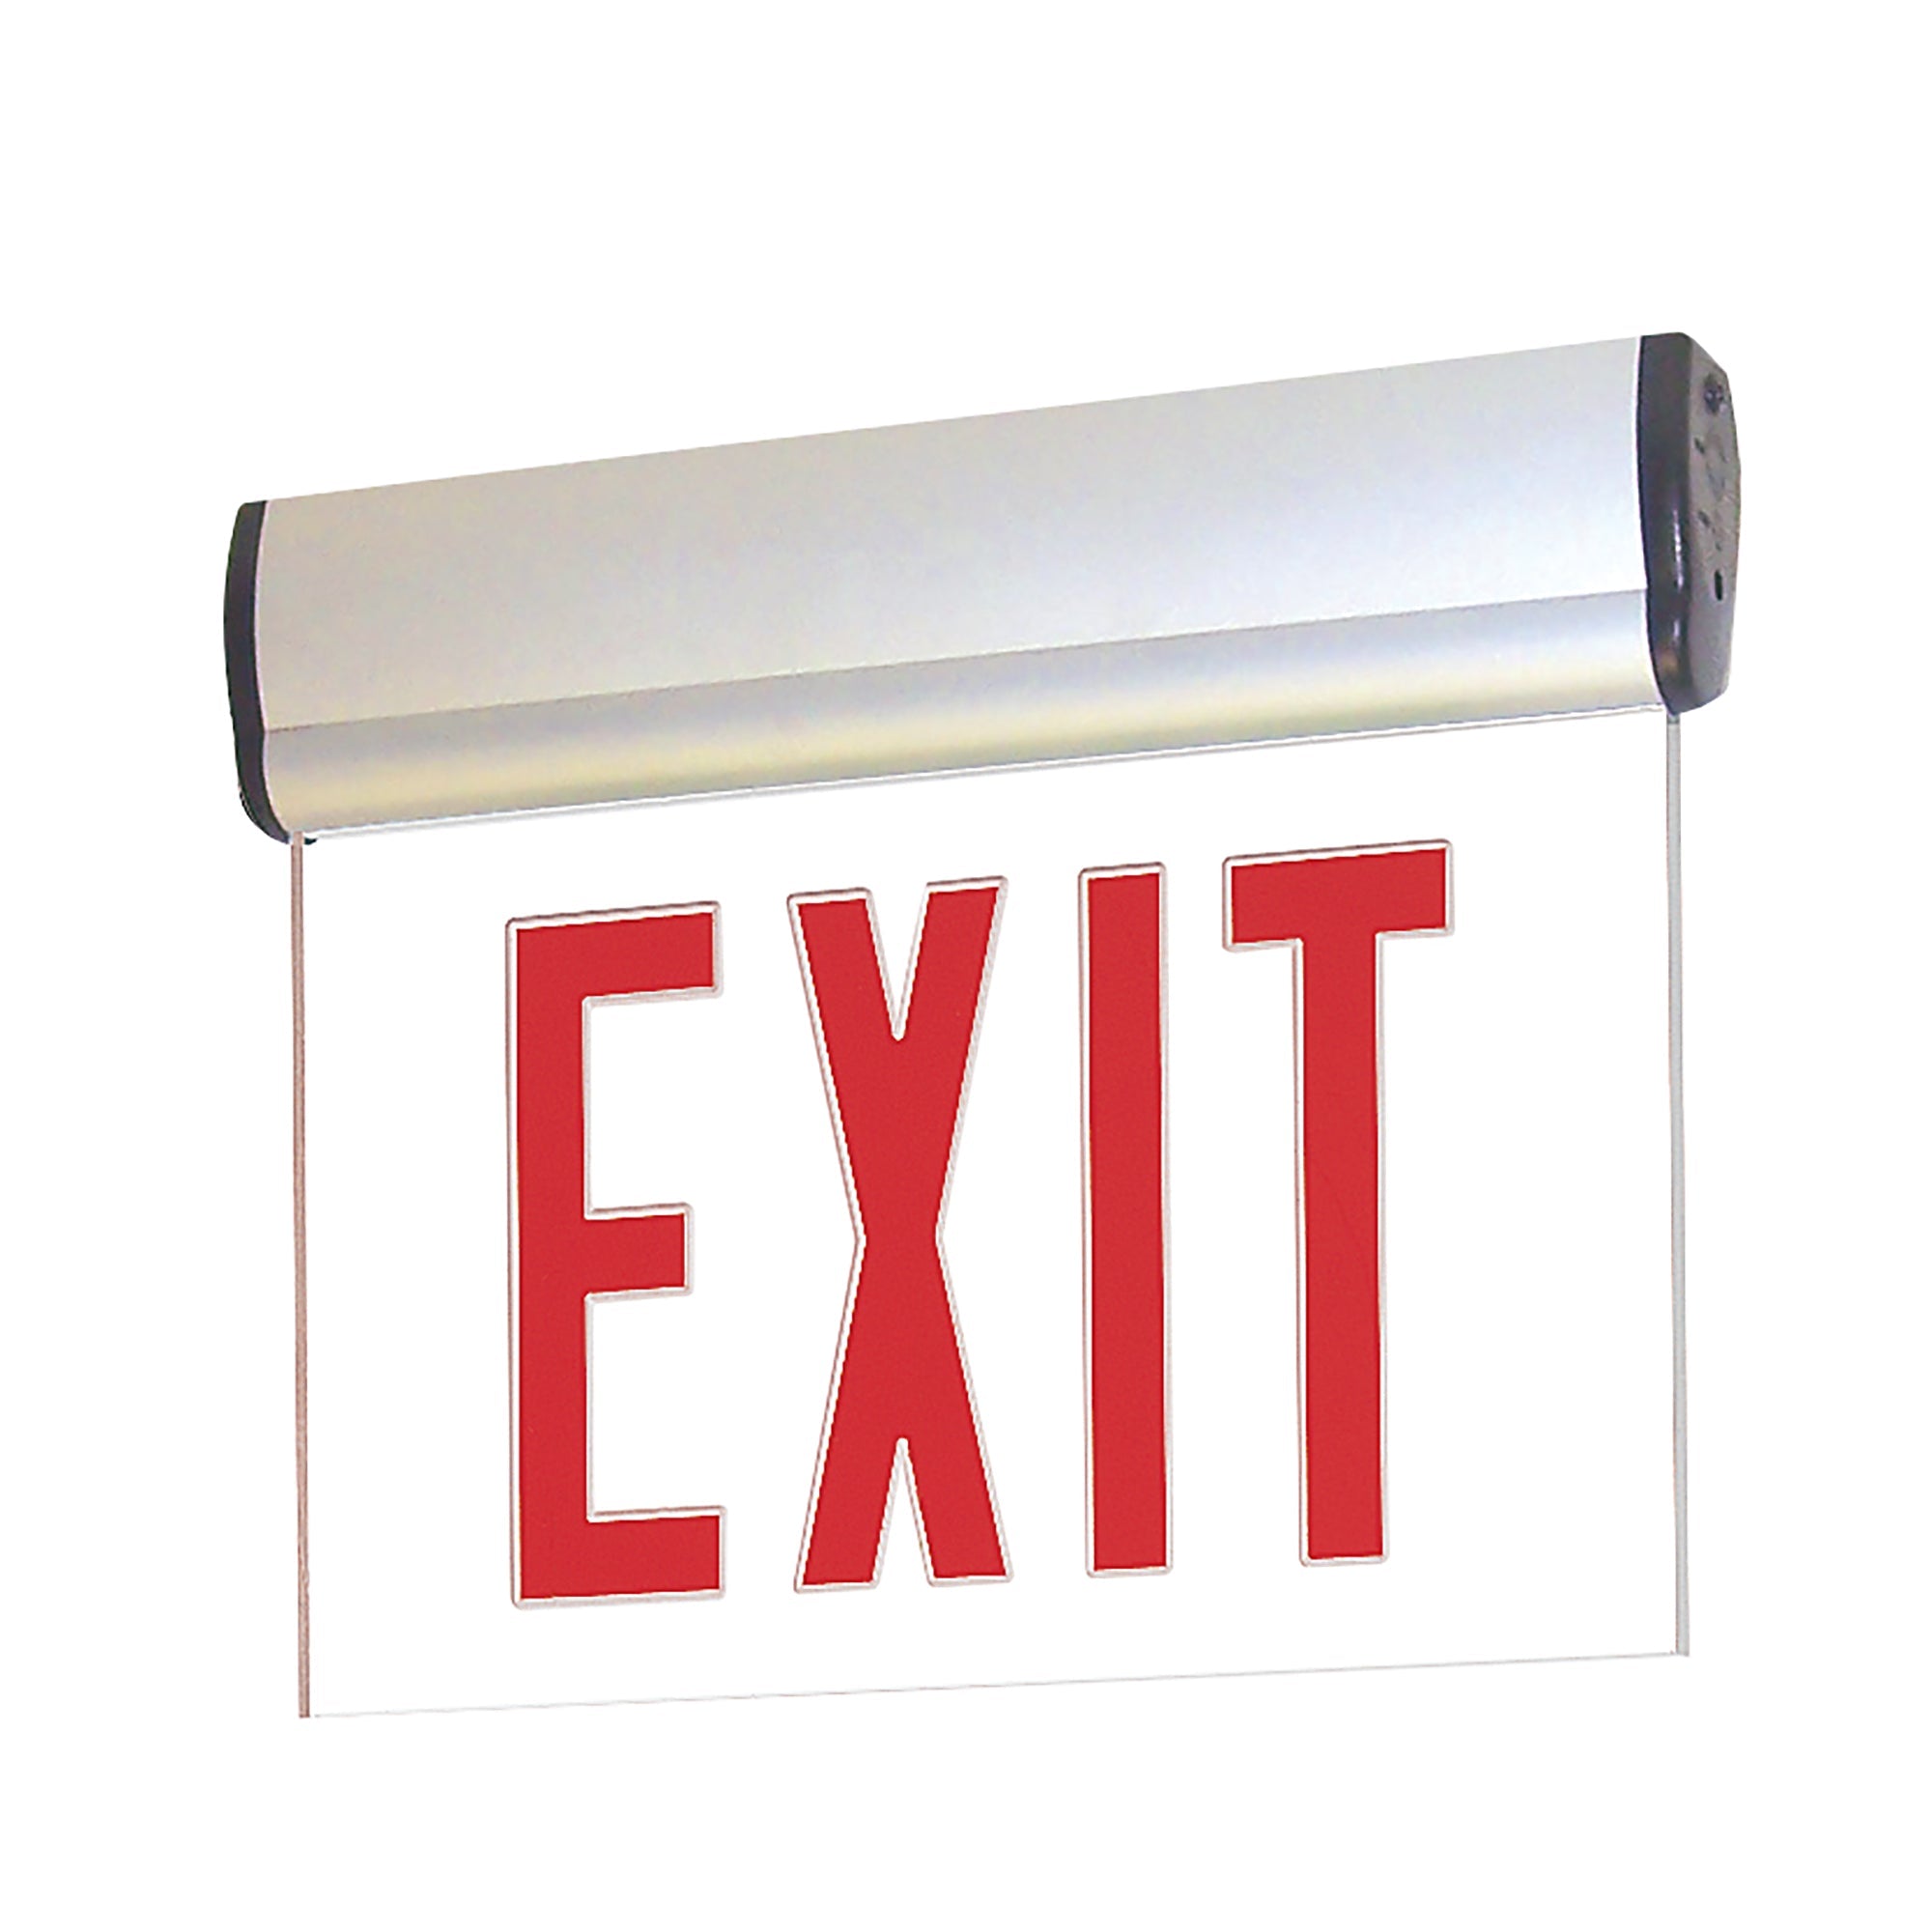 Nora Lighting NX-810-LEDRCA - Exit / Emergency - Surface Adjustable LED Edge-Lit Exit Sign, AC only, 6 Inch Red Letters, Single Face / Clear Acrylic, Aluminum Housing